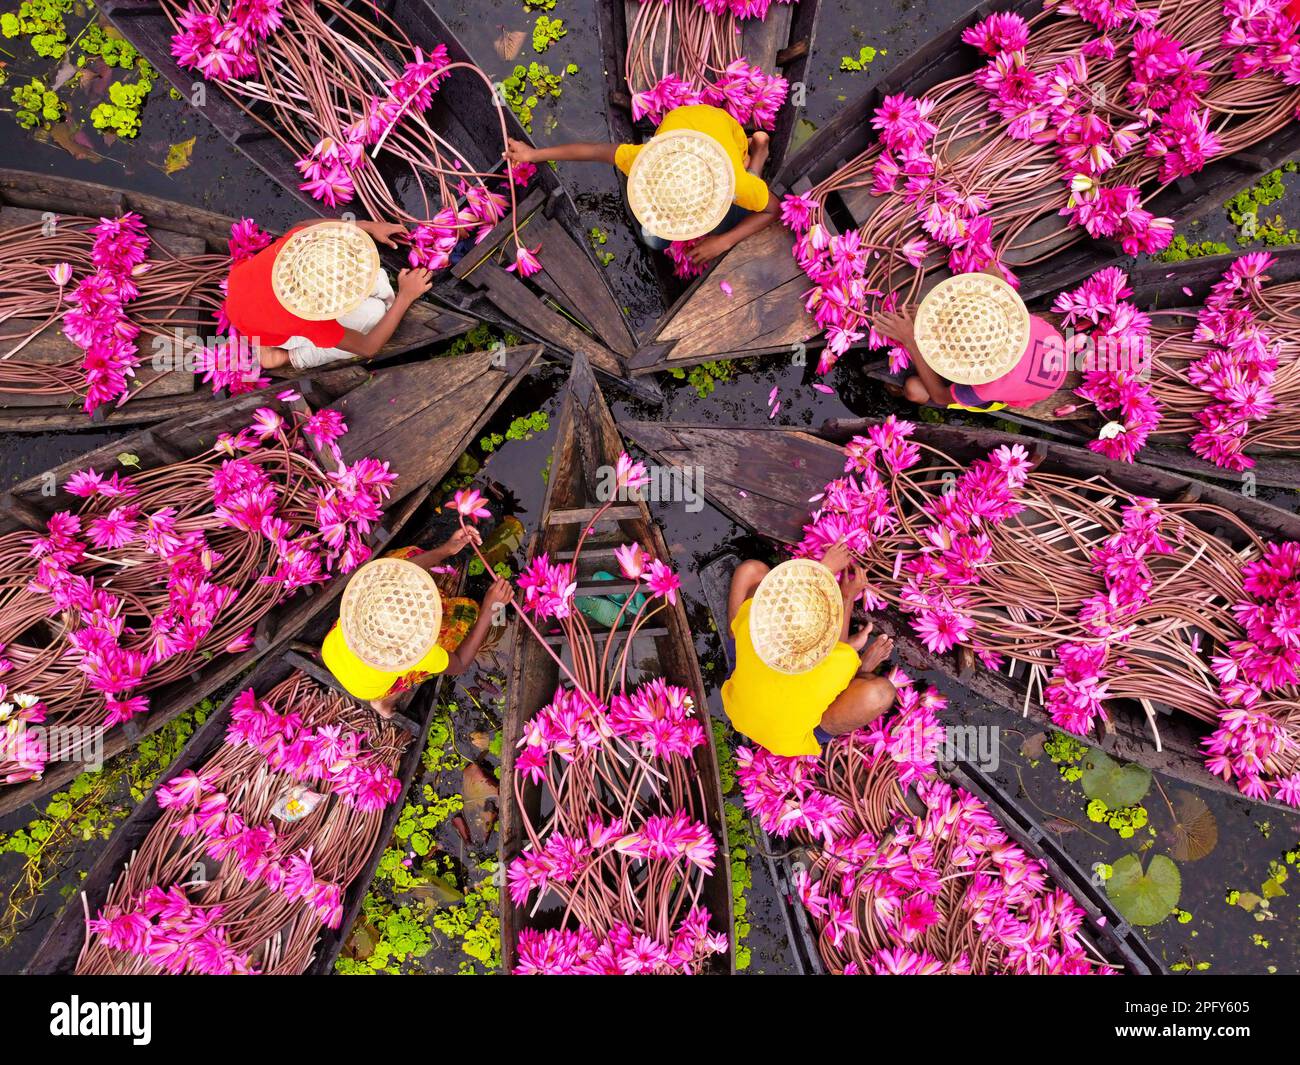 Barishal, Bangladesh. March 19, 2023, Barishal, Bangladesh: Farmers arrange bunches of water lilies after harvesting them from the wetlands. Floating through 10,000 acres of canal, every flower is carefully hand-picked, collected inside the farmers' little wooden boat, tied in bundles, and sold to markets. Working for an entire day, a farmer can pick around 80 to 120 bundles of water lilies. Each bundle comprises 10 water lilies and is sold for only 15 BDT (0.14 USD) in the retail market. Credit: ZUMA Press, Inc. Credit: ZUMA Press, Inc./Alamy Live News Stock Photo